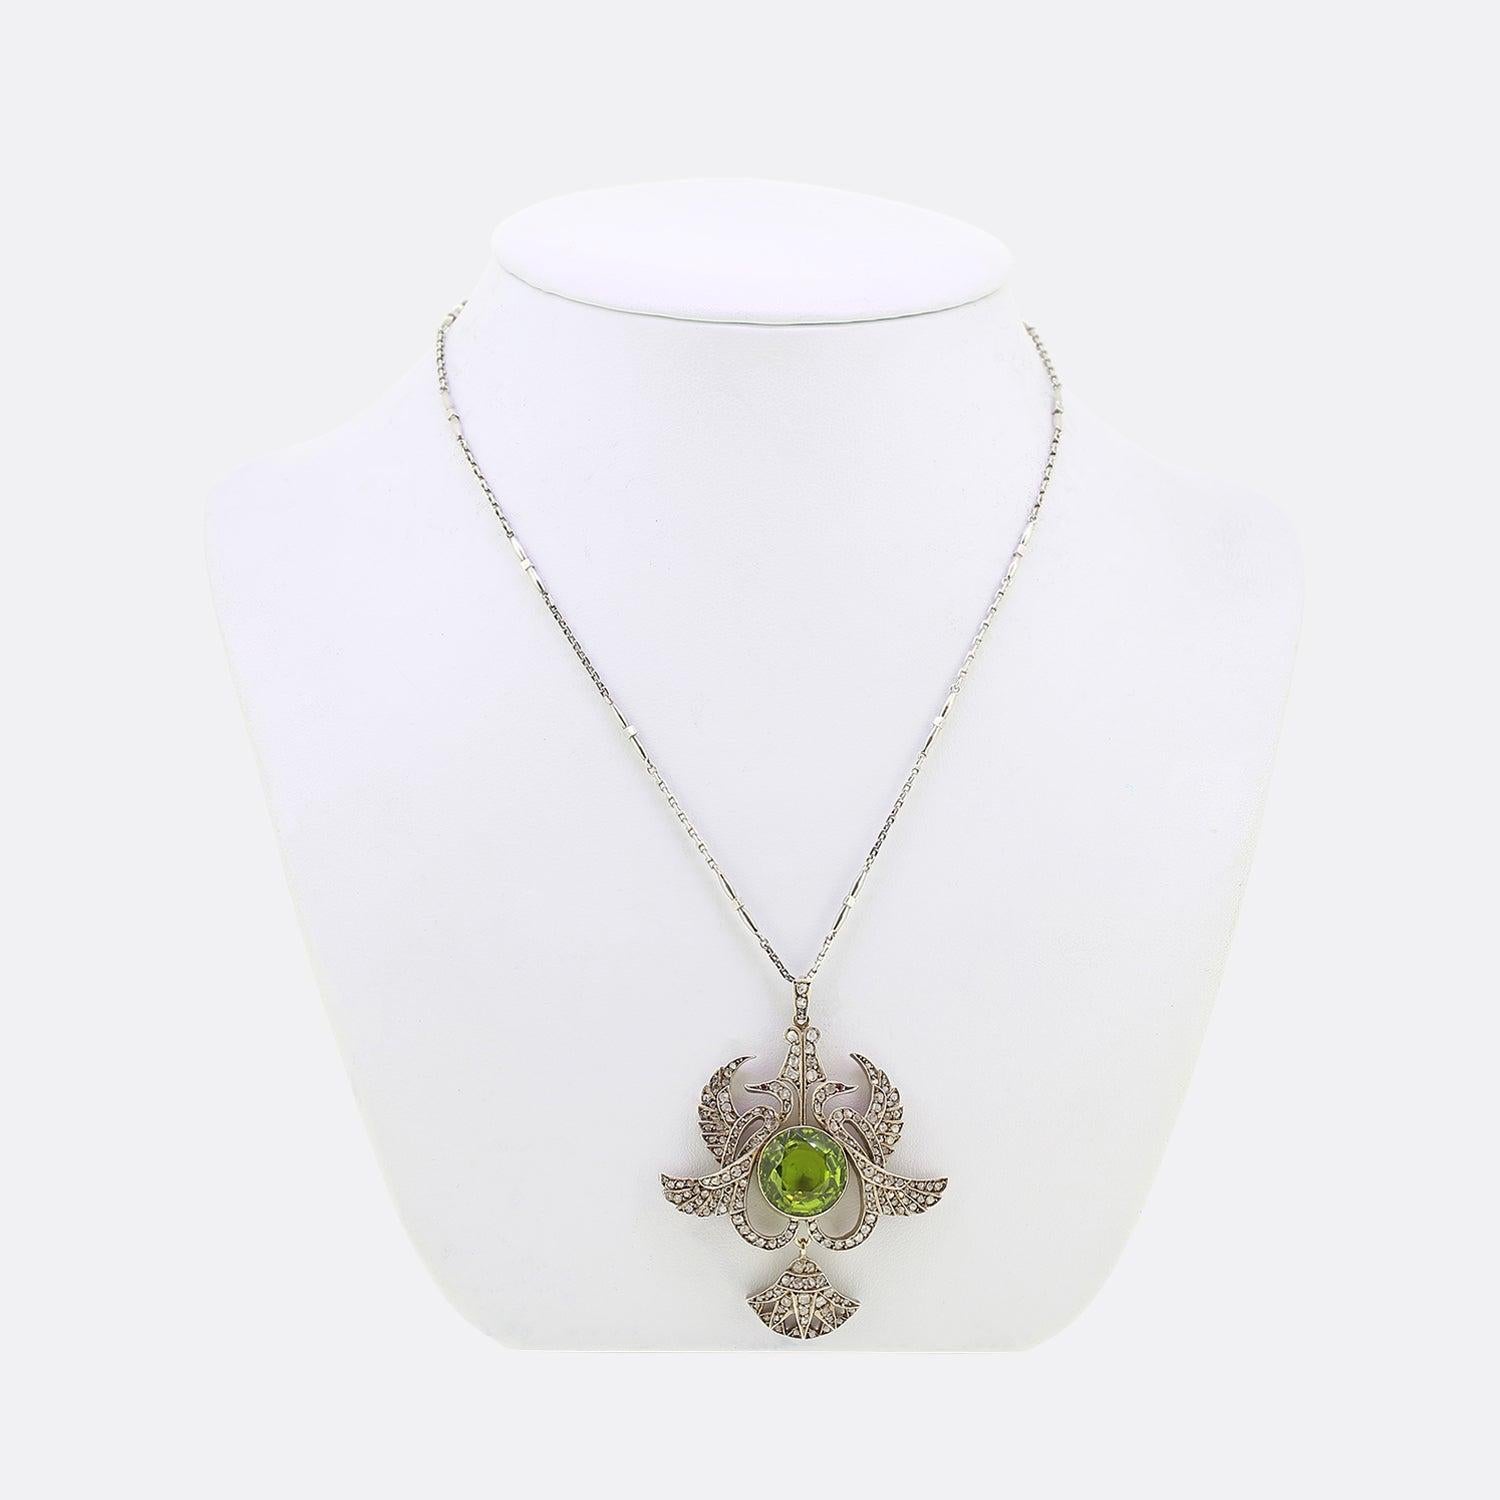 Here we have an excellently assembled vintage peridot and diamond necklace. The focal point of this piece is the large peridot which is milgrain set at the centre. This principle stone sits slightly risen amidst a frame crafted from silver into the